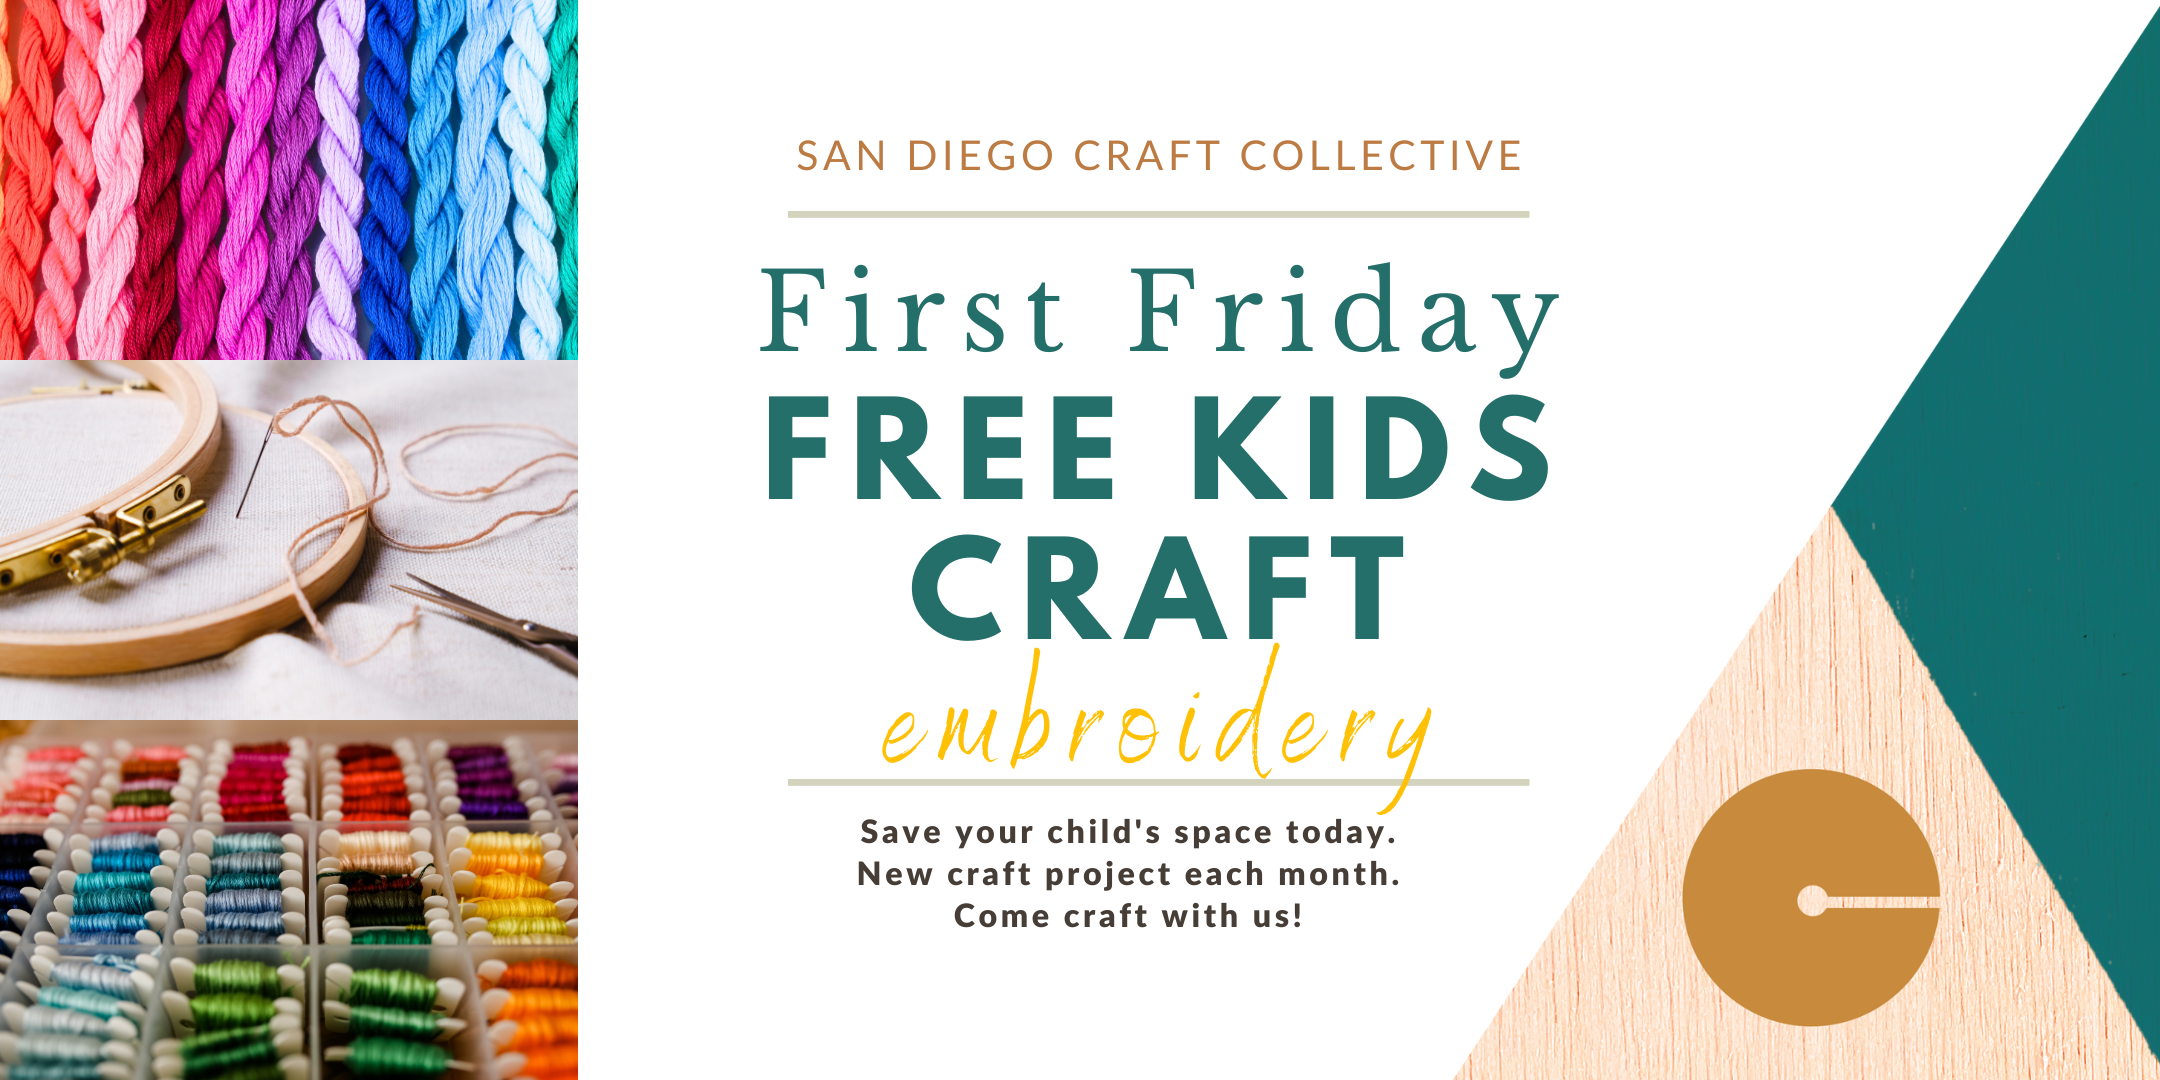 First Friday for Fiber Fest at San Diego Craft Collective. Come learn embroidery, free kids craft!